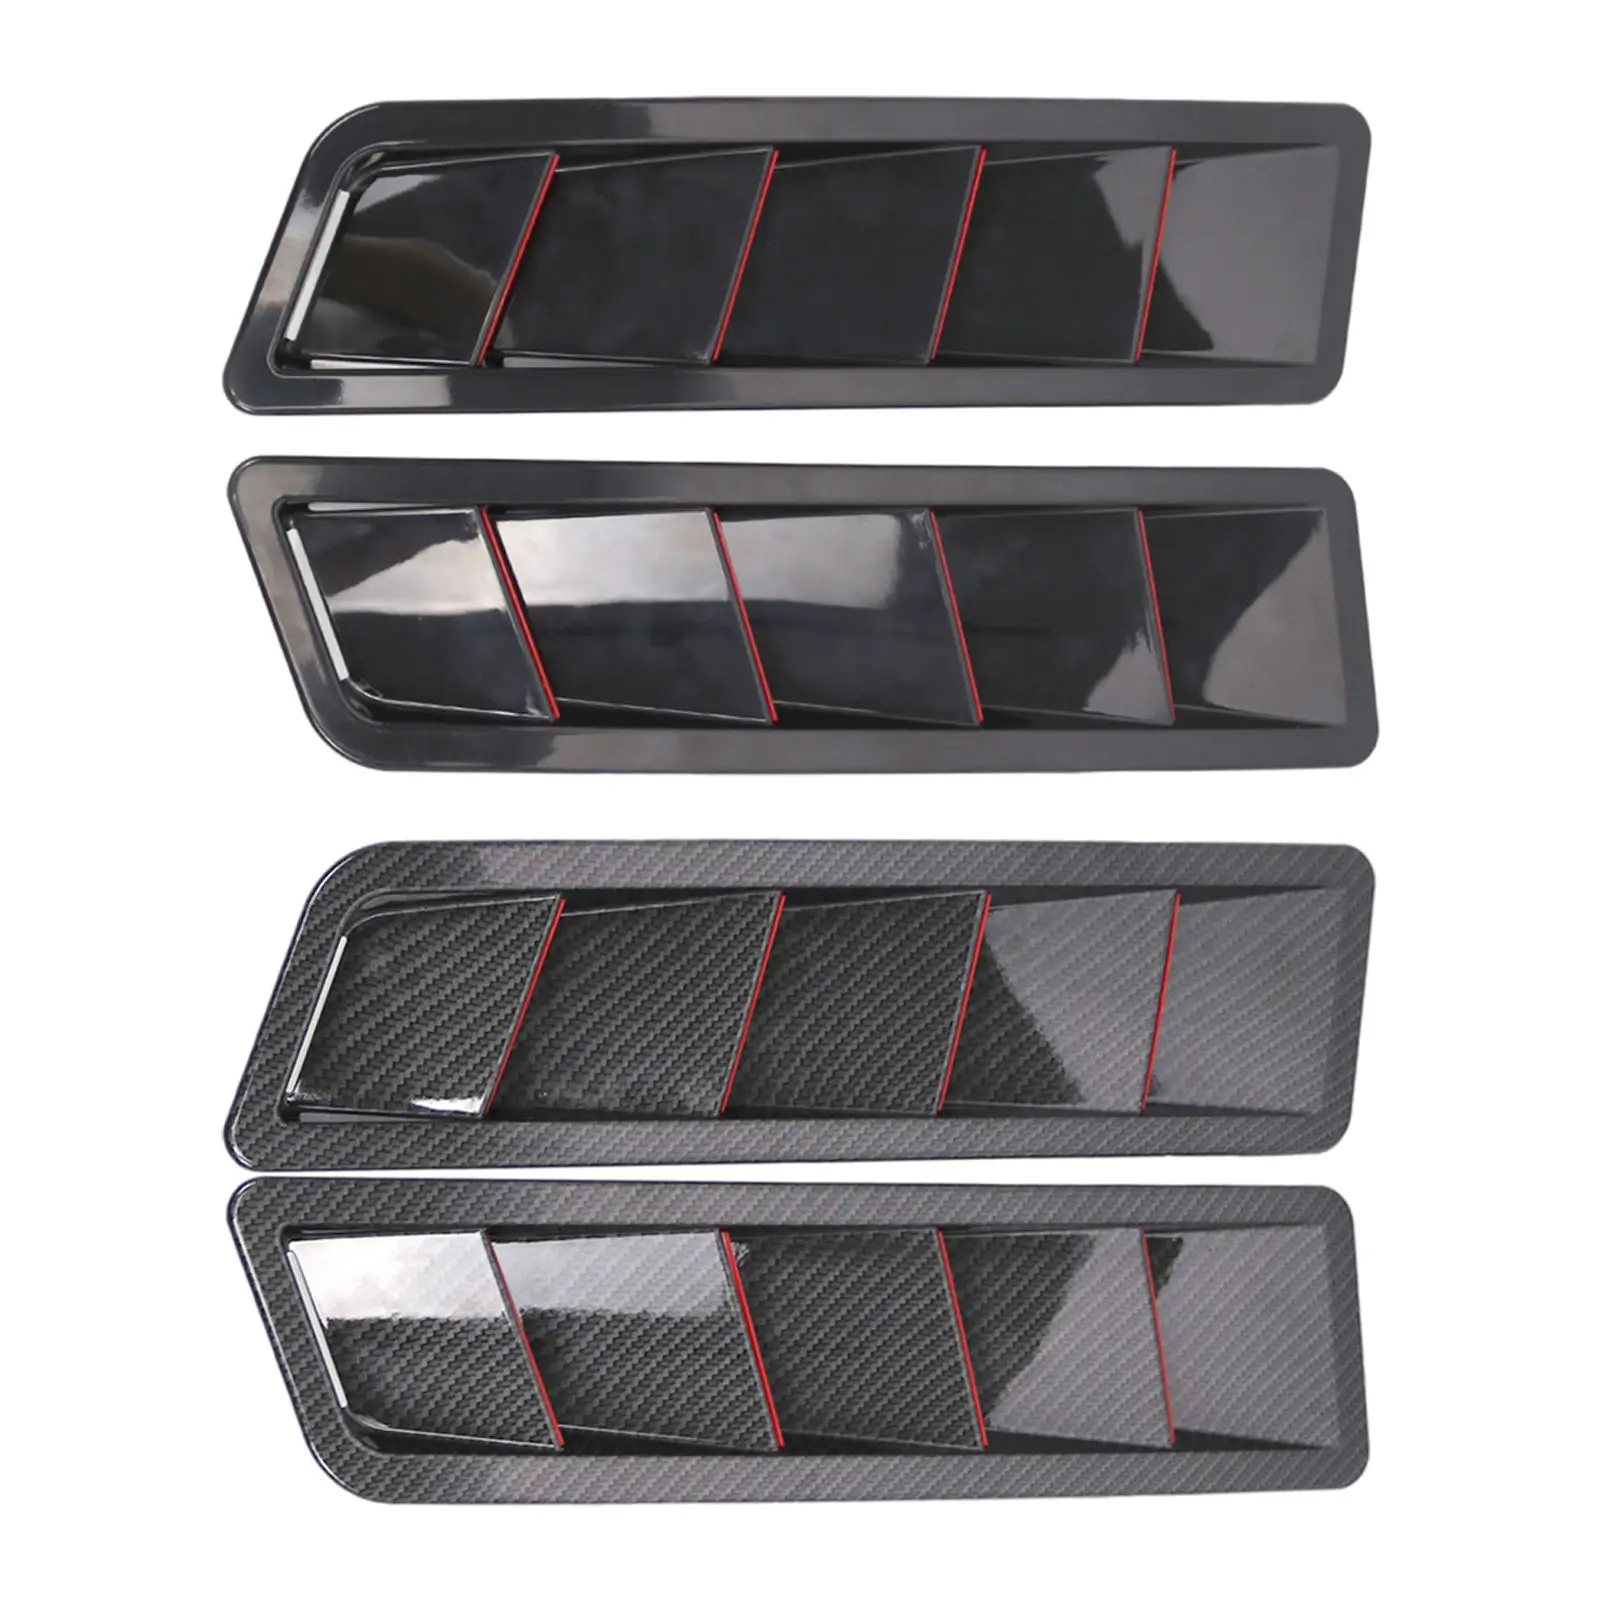 Car Hood Vent Scoop Kit Vents Bonnet Cover Air Flow Intake Louver Vehicles Fitment Louvers Fit for SUV Truck Replacement Parts